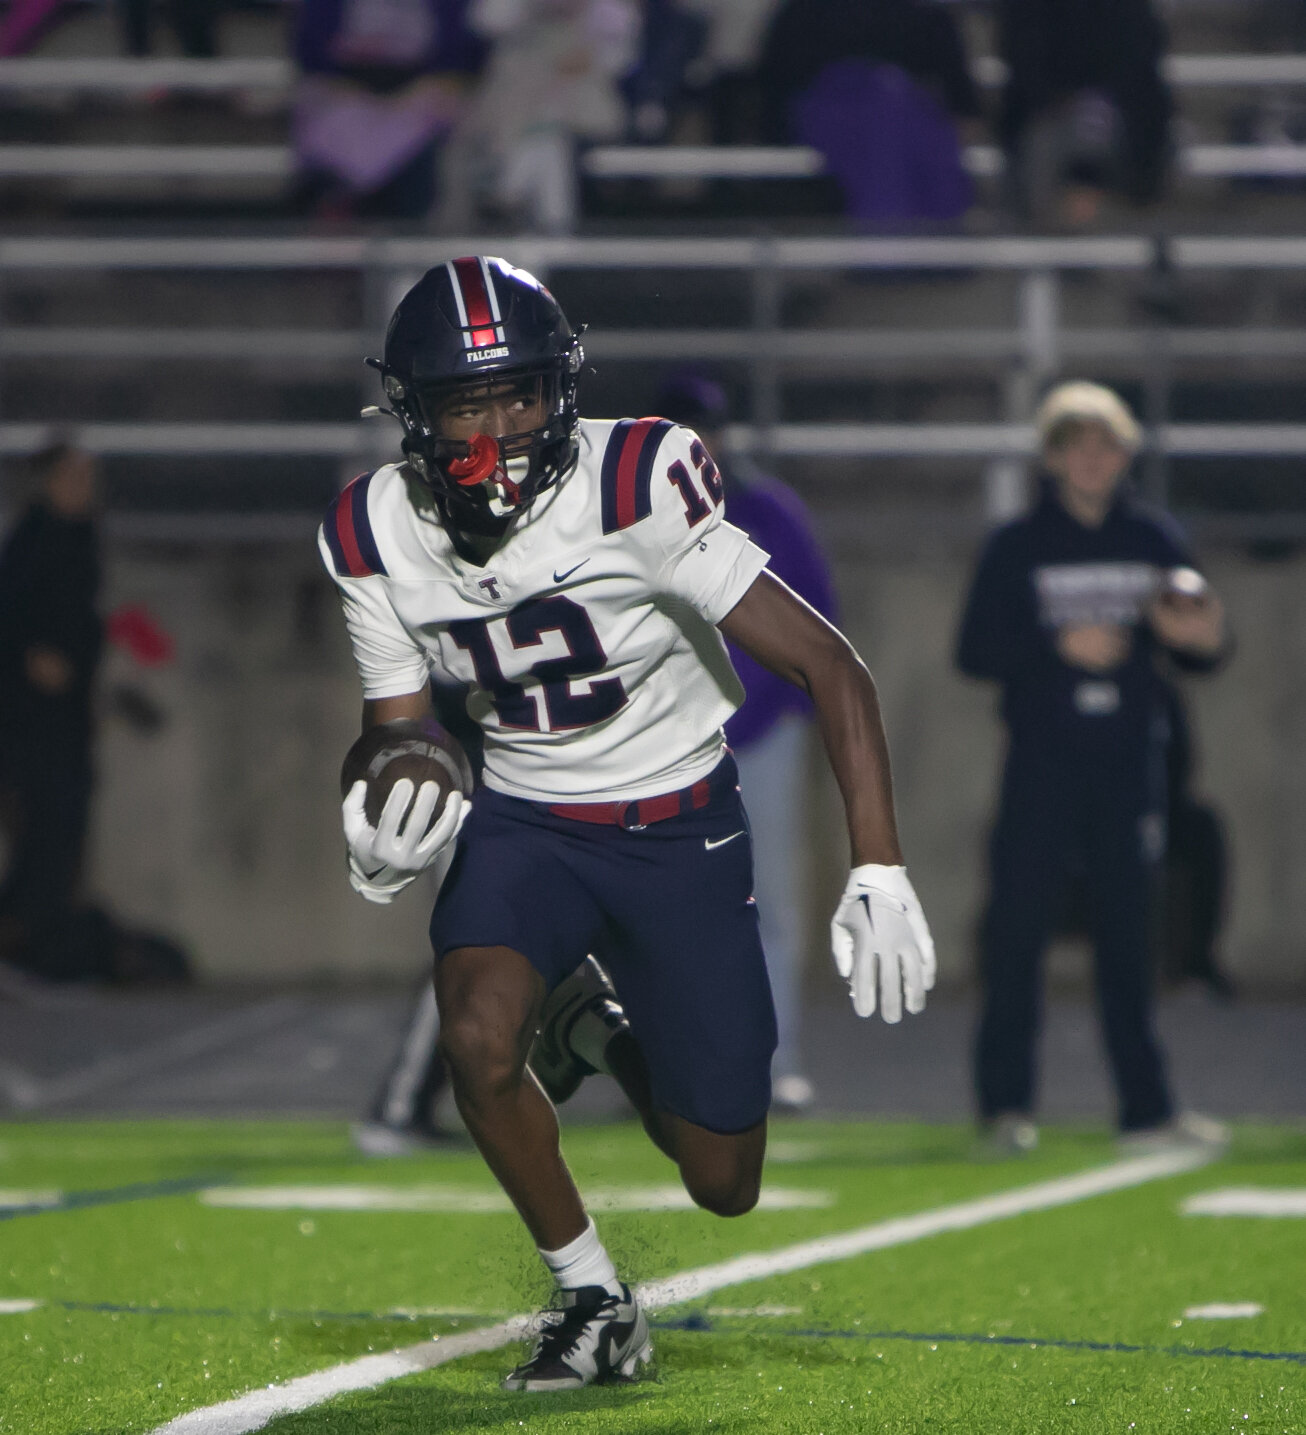 KJ Madison cuts upfield after catching a pass during Friday's game between Tompkins and Ridge Point at Hall Stadium.